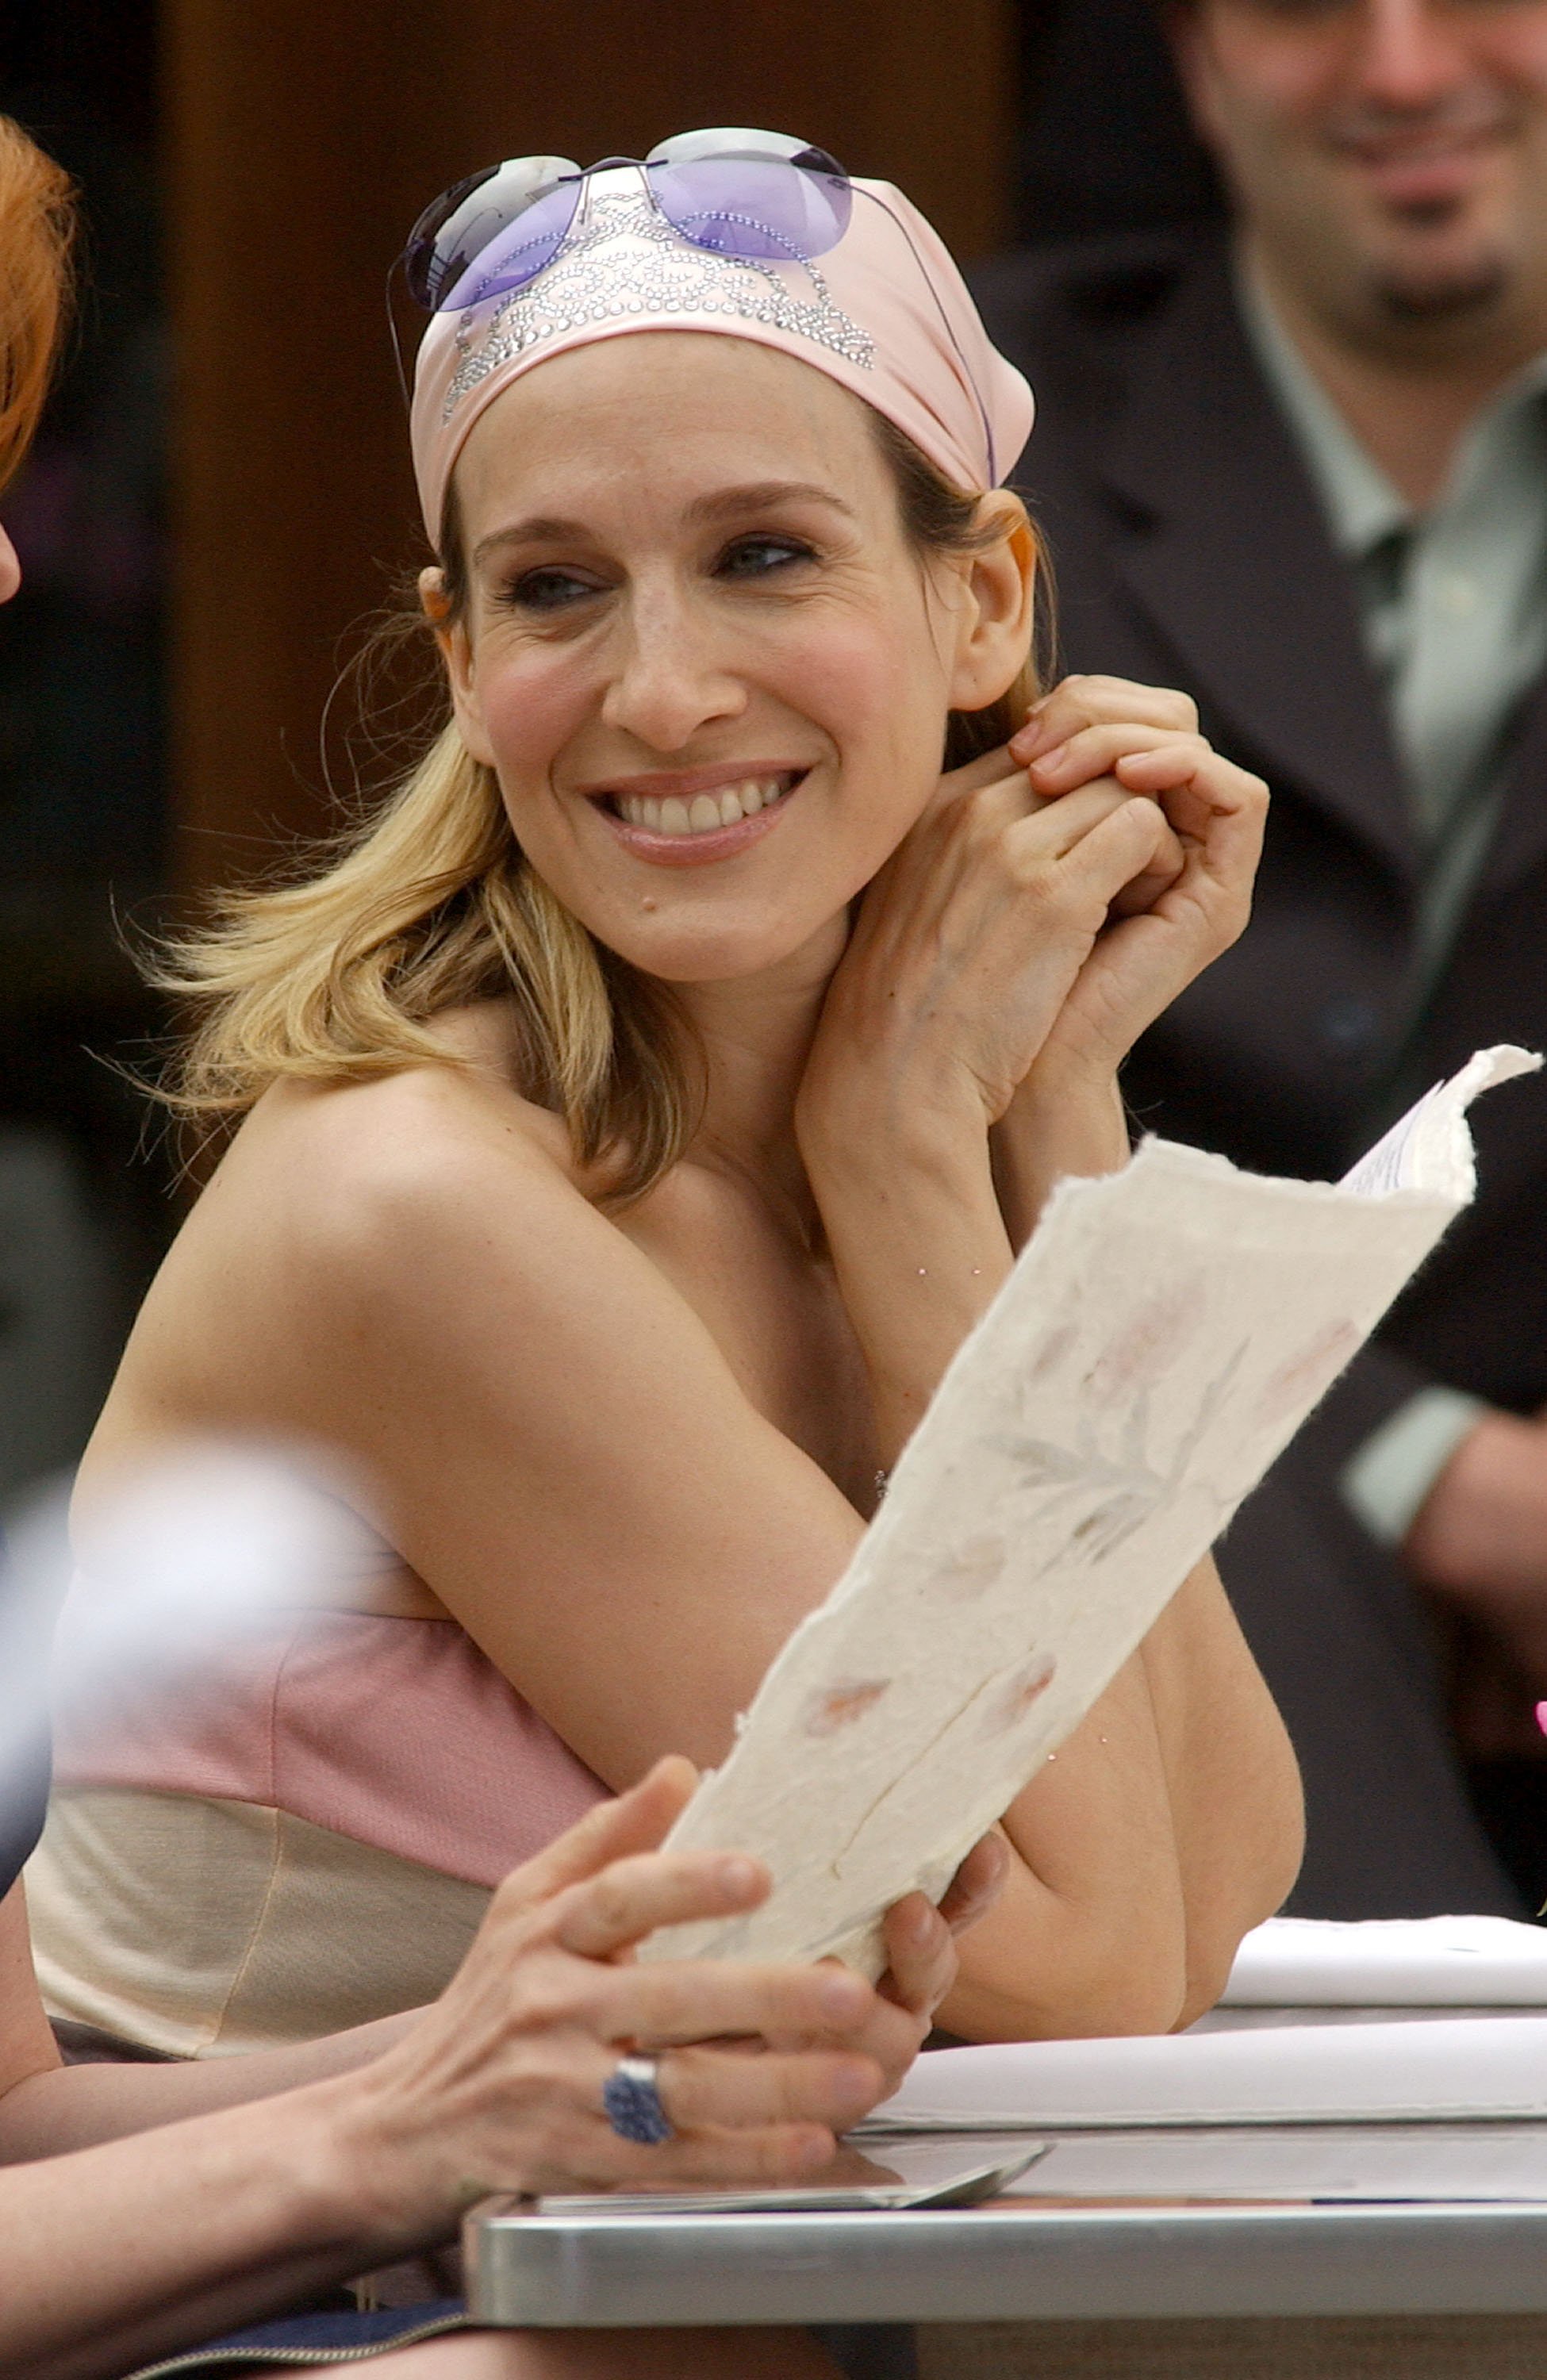 Sarah Jessica Parker in 'Sex and the City'